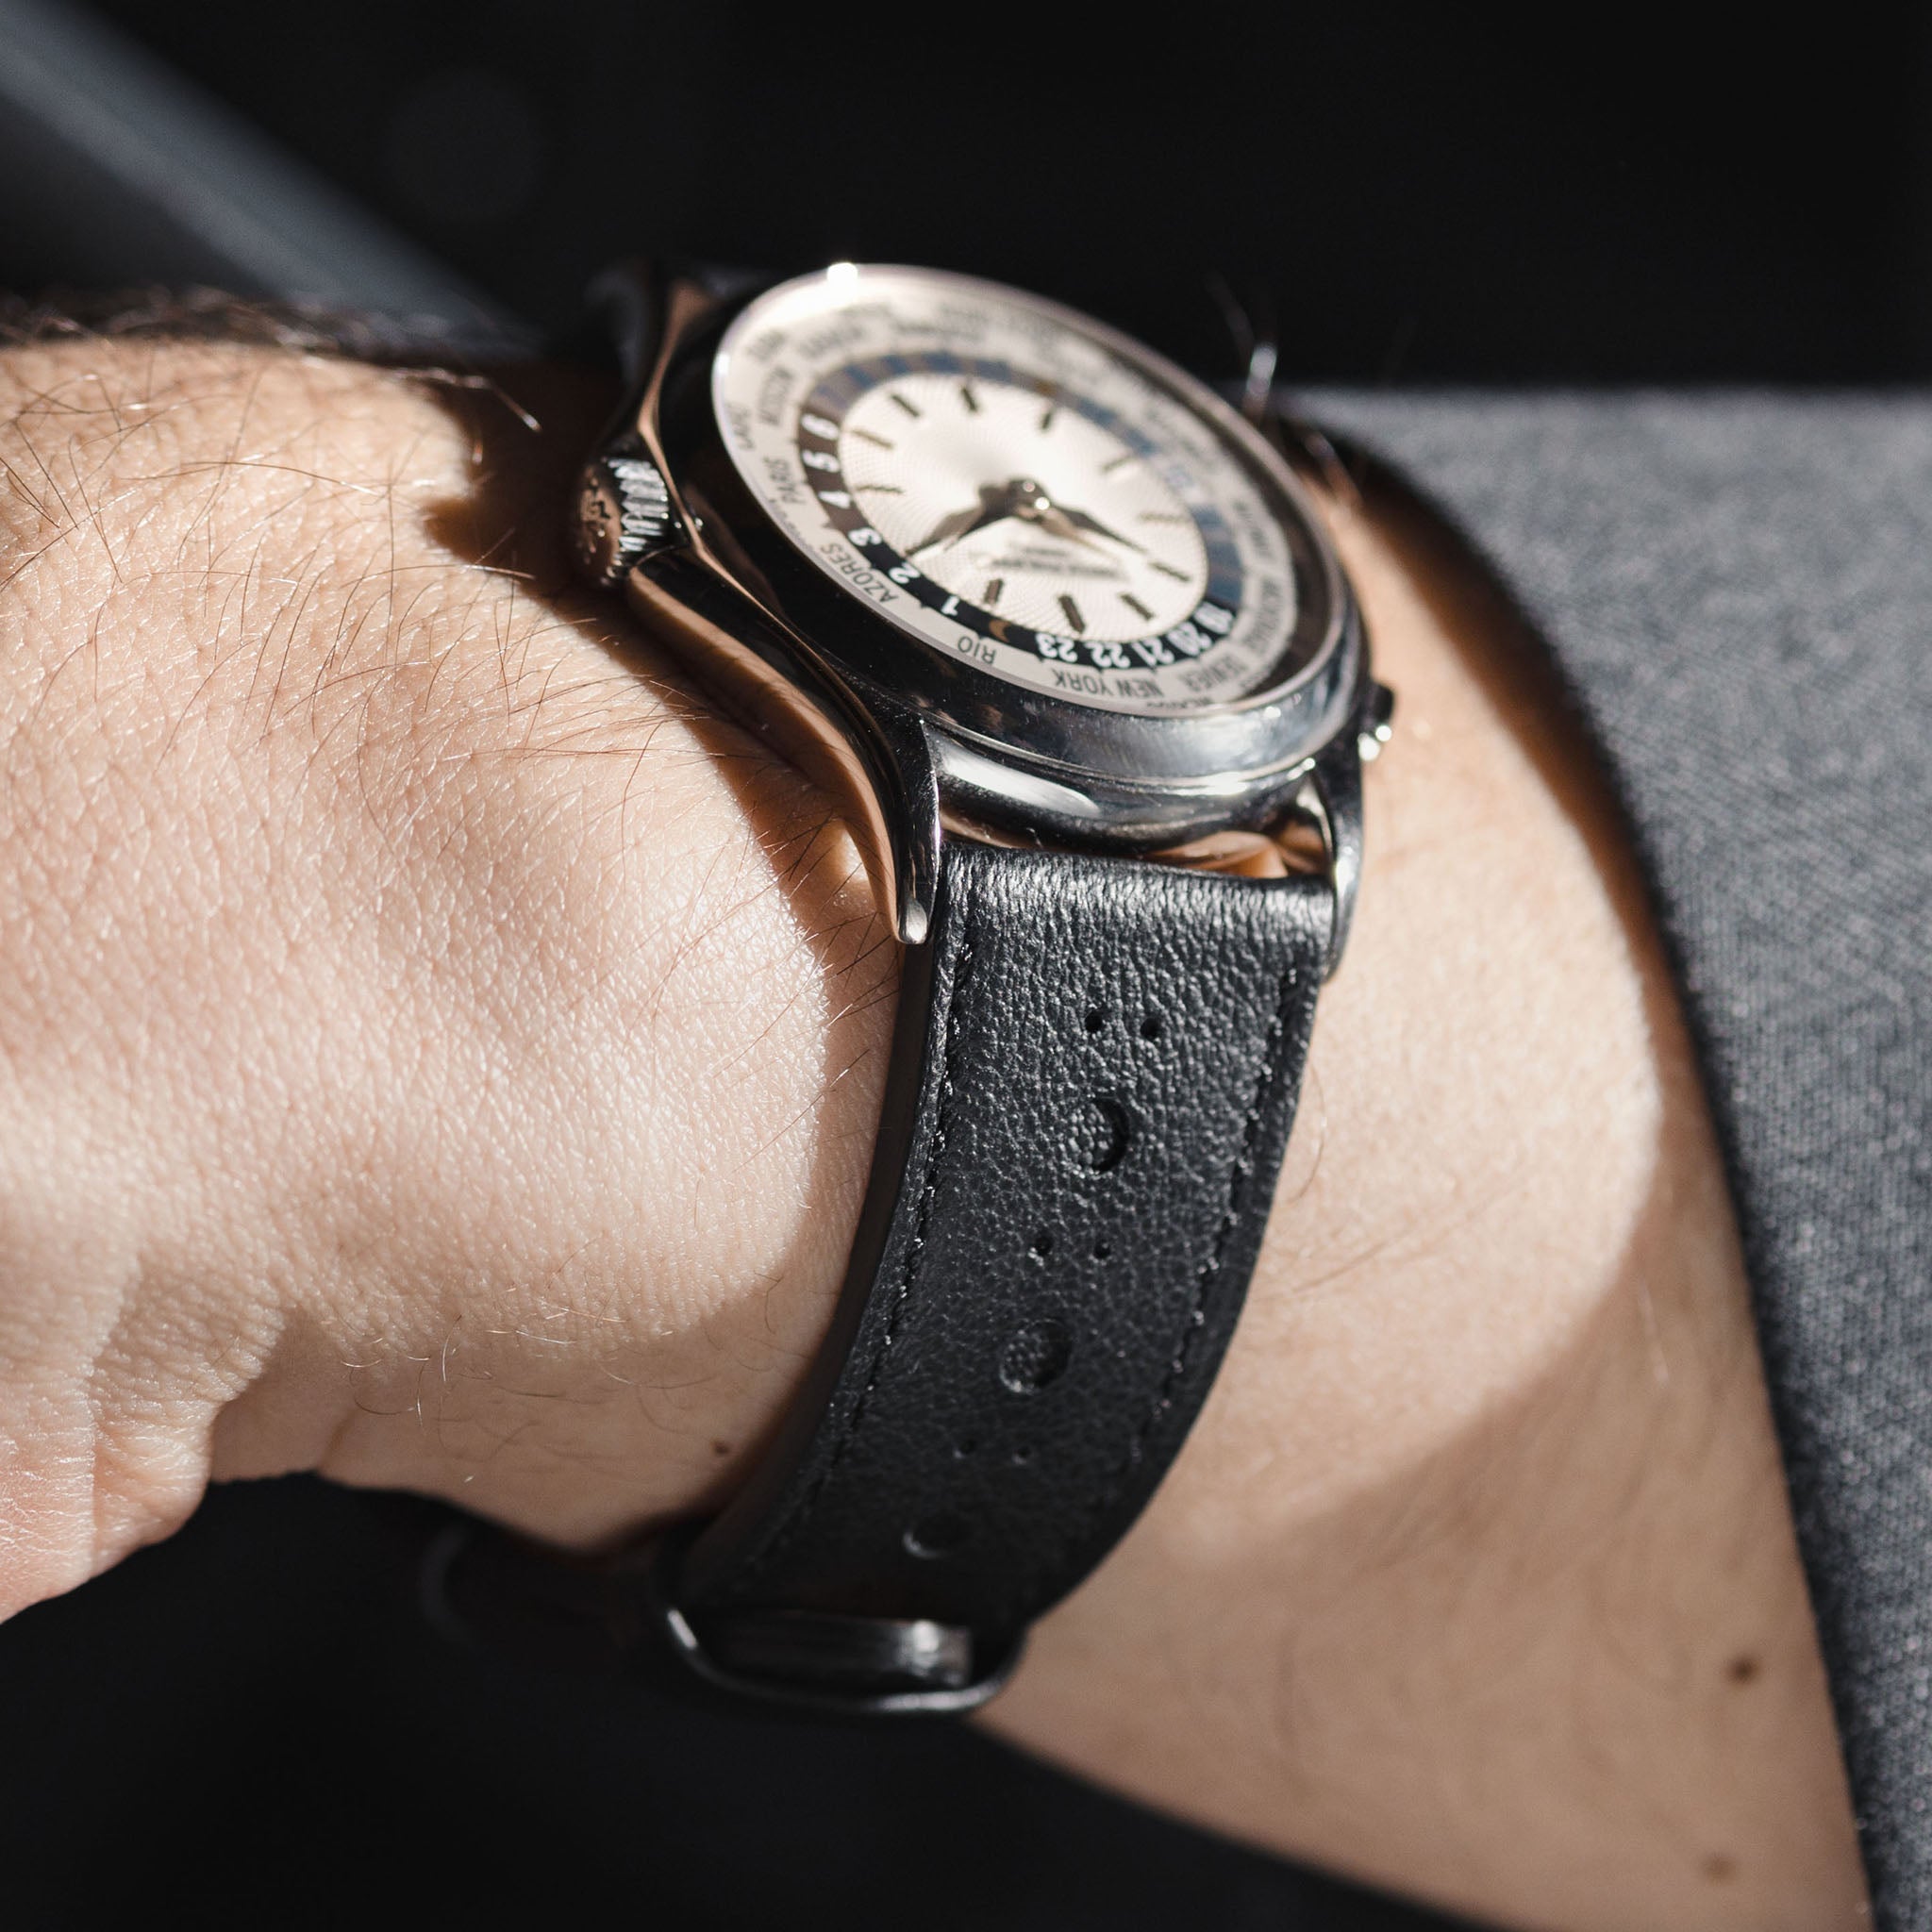 The Wall Street Black Brogue Leather Watch Strap – Jubilee Edition